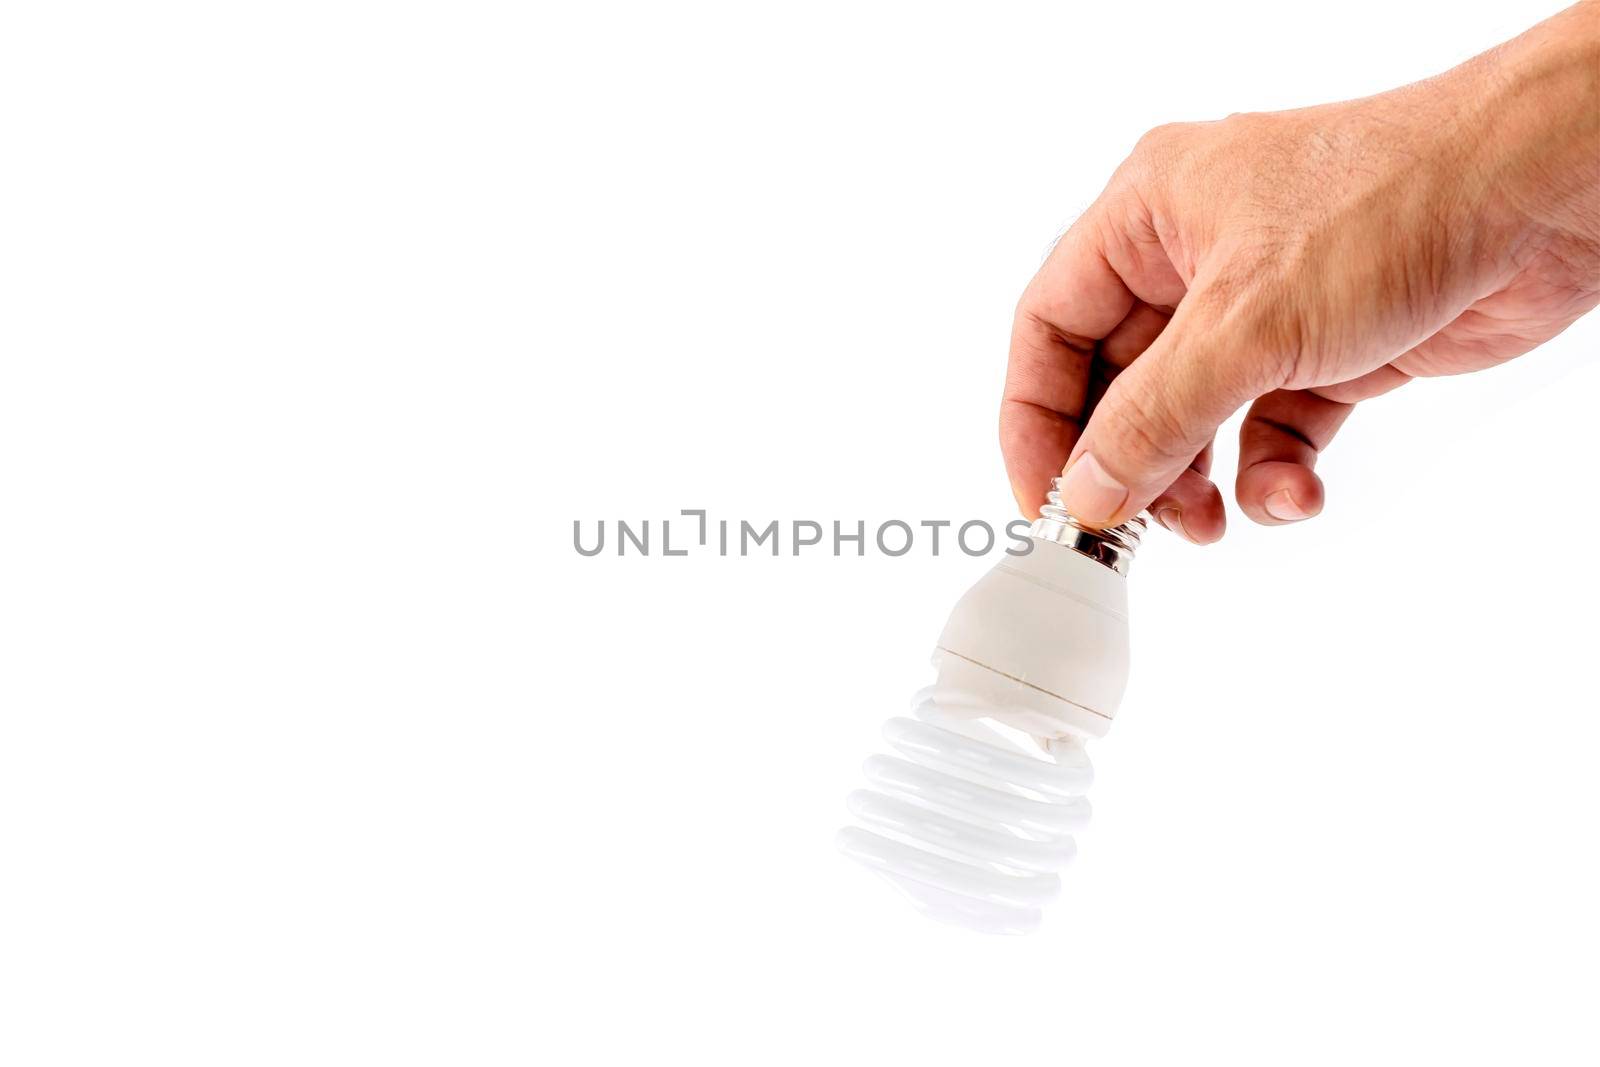 Human hand holding fluorescent light bulb isolated on white background.